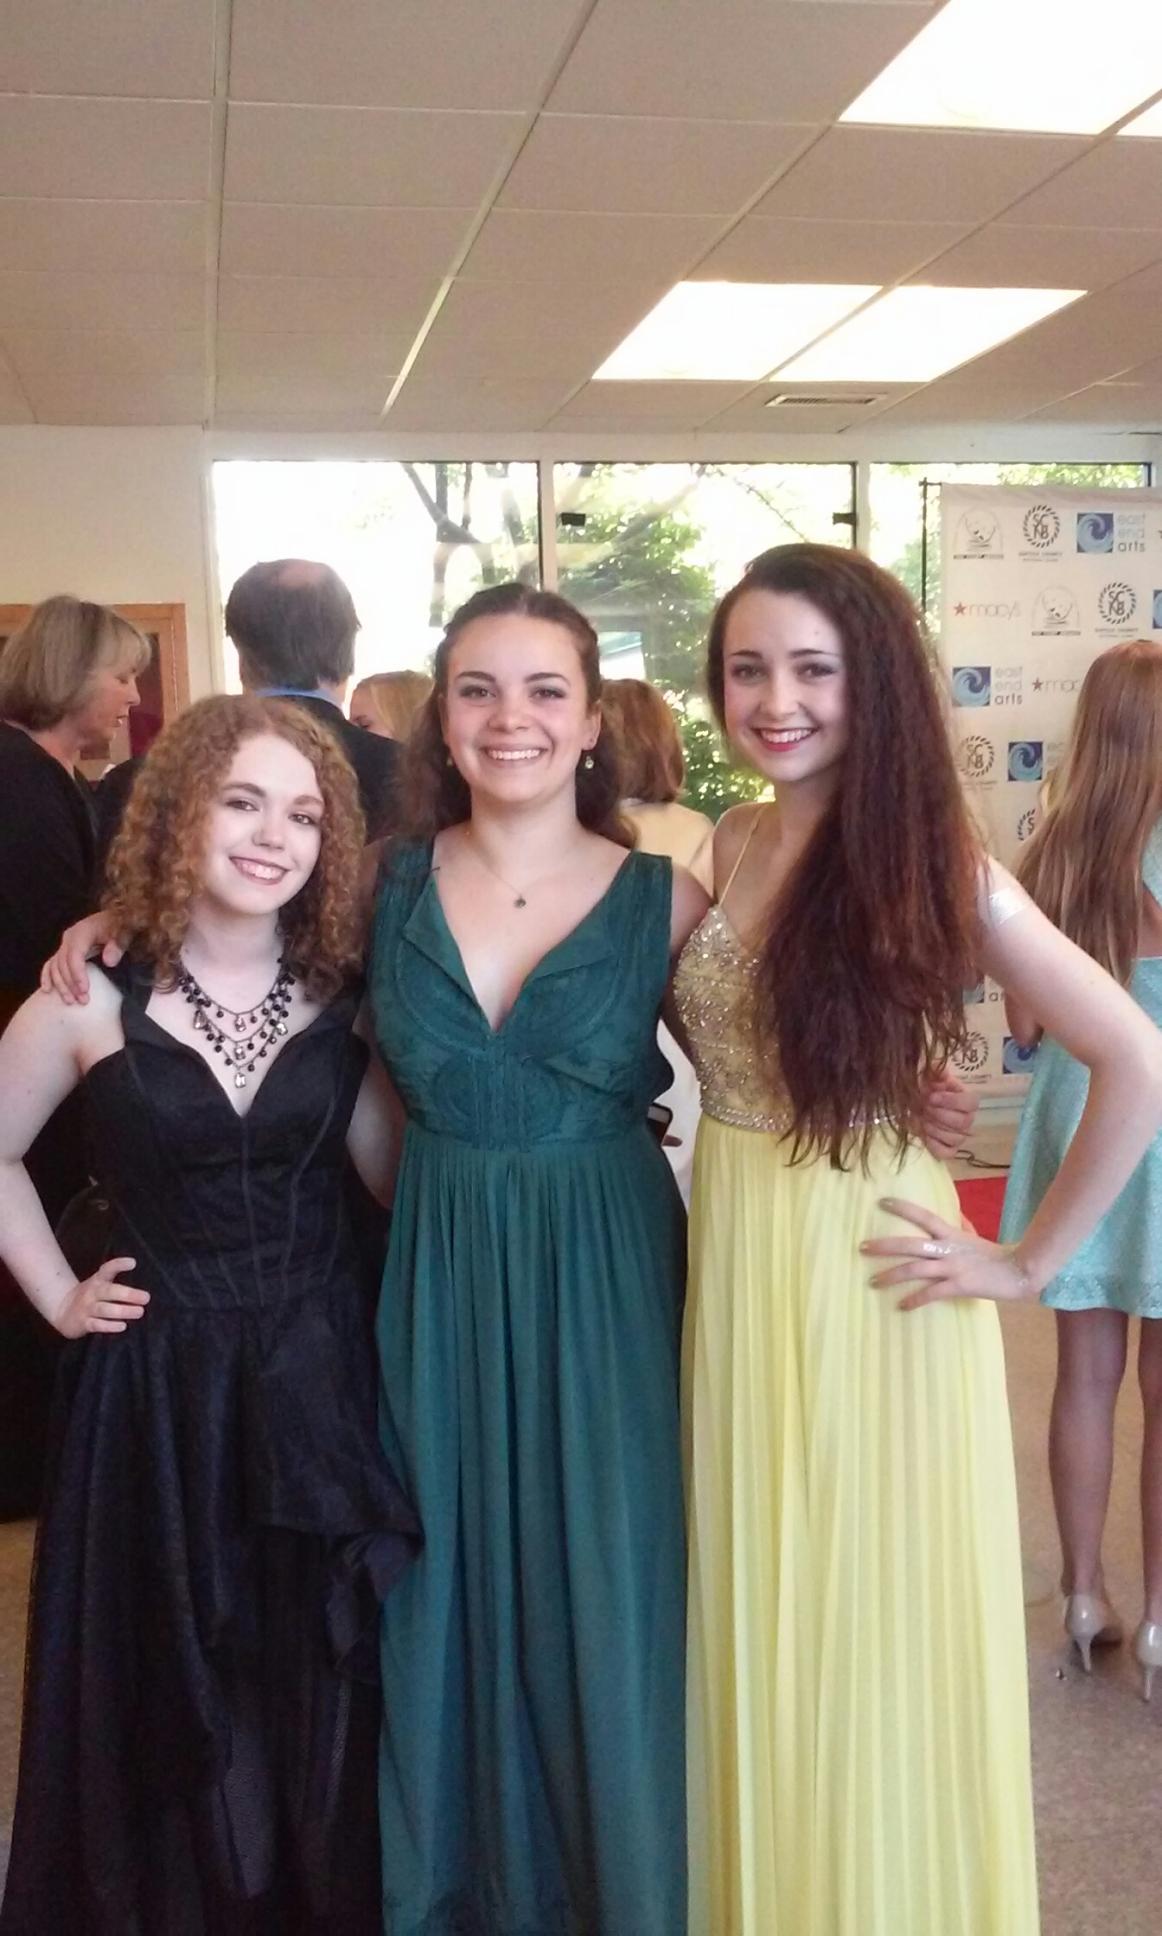 Colleen Kelly (right) at the 2015 EEA Teeny Awards, with Gwyn Foley (left) and Raven Janoski (center)